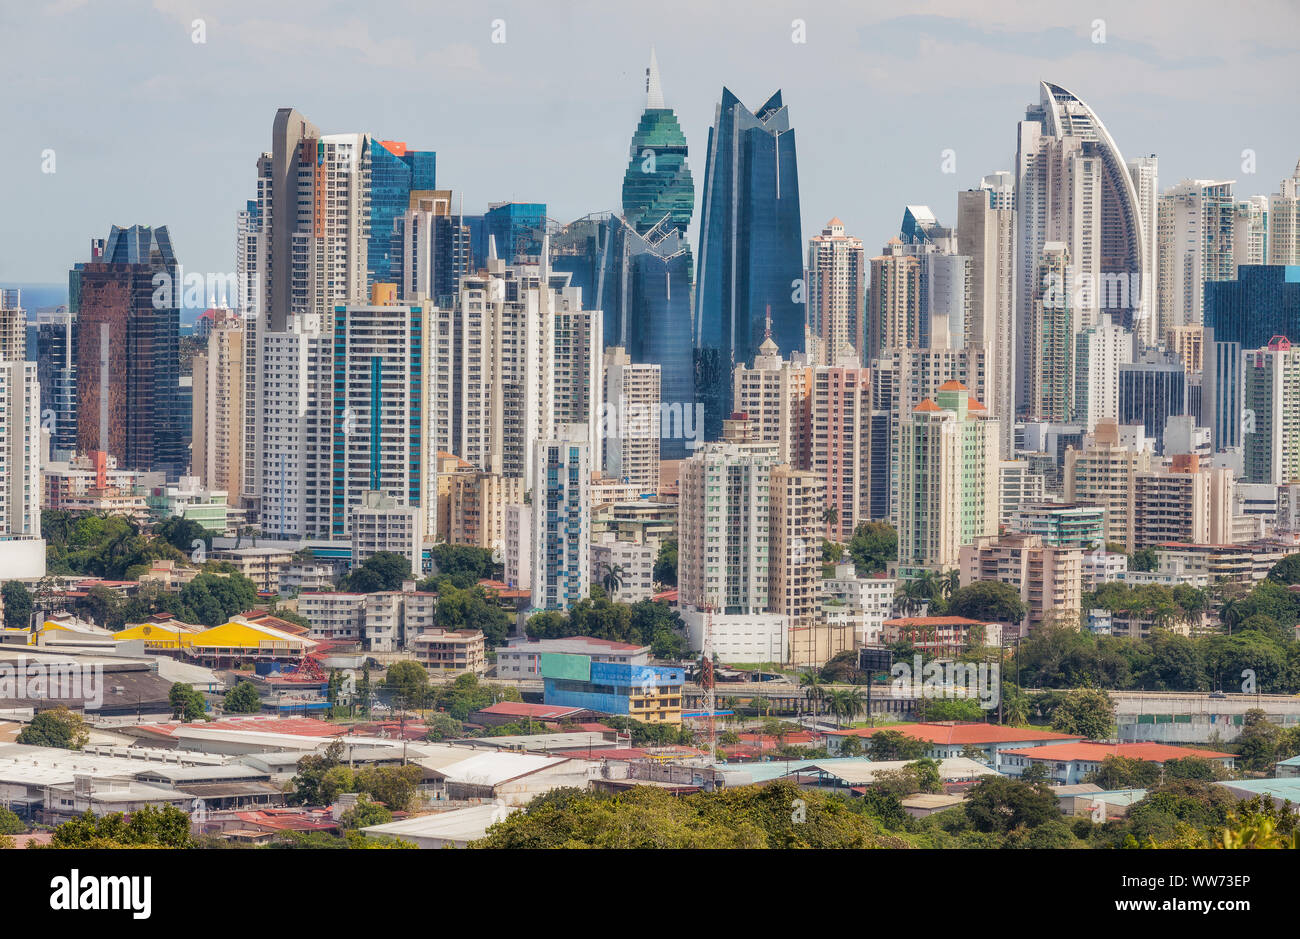 The skyline of Panama City with its modern skyscrapers. Stock Photo